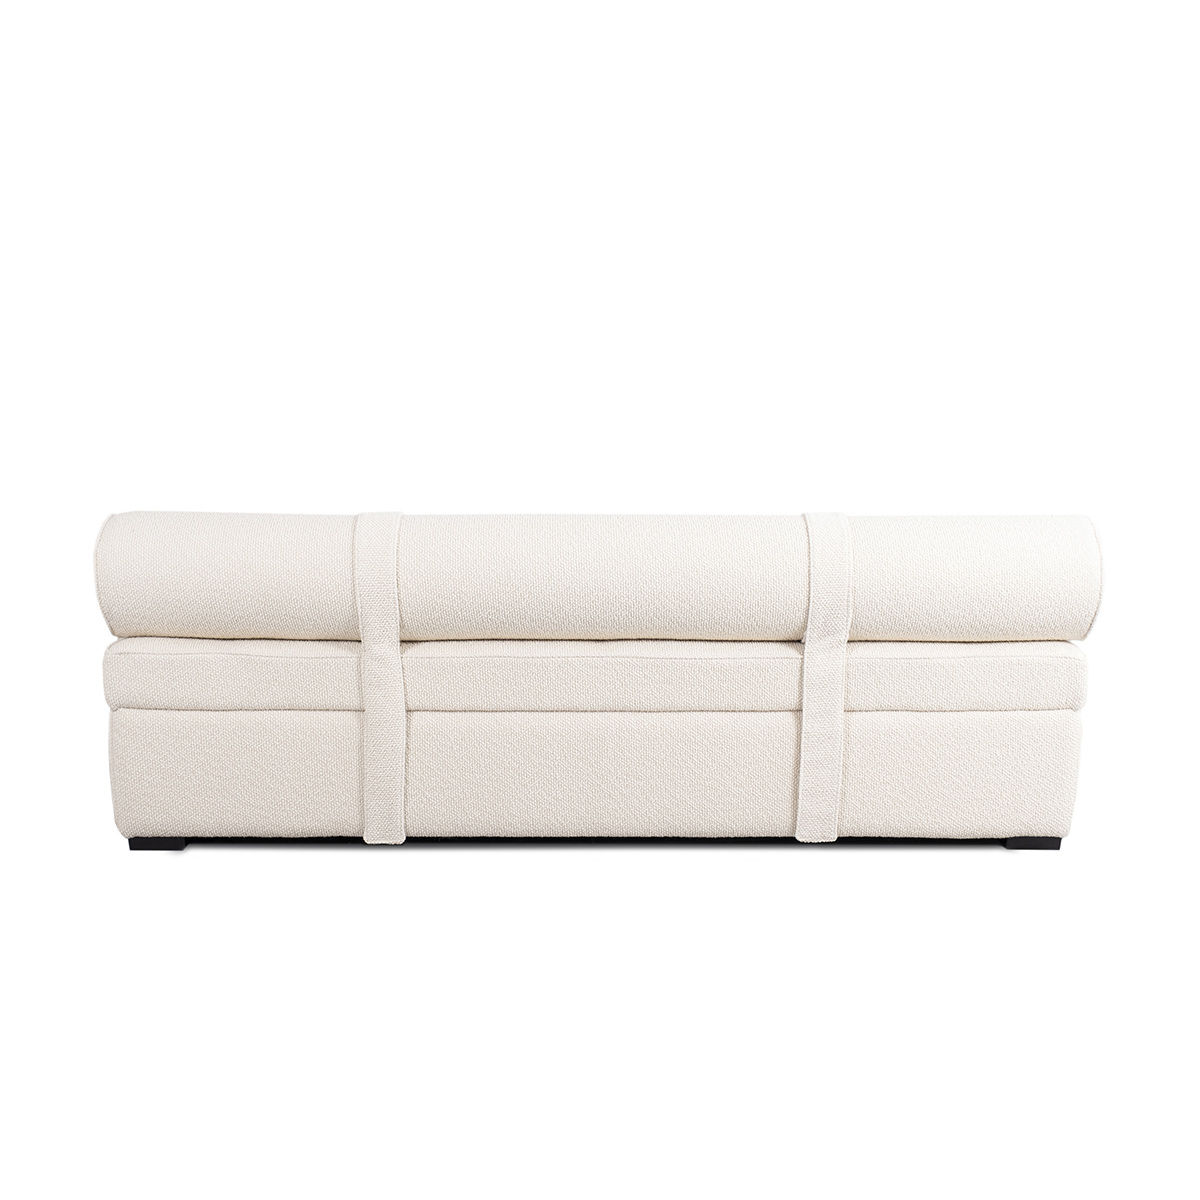 Banquette Jacob, White - L185 x W75 x H40 - Curly wool - image 3